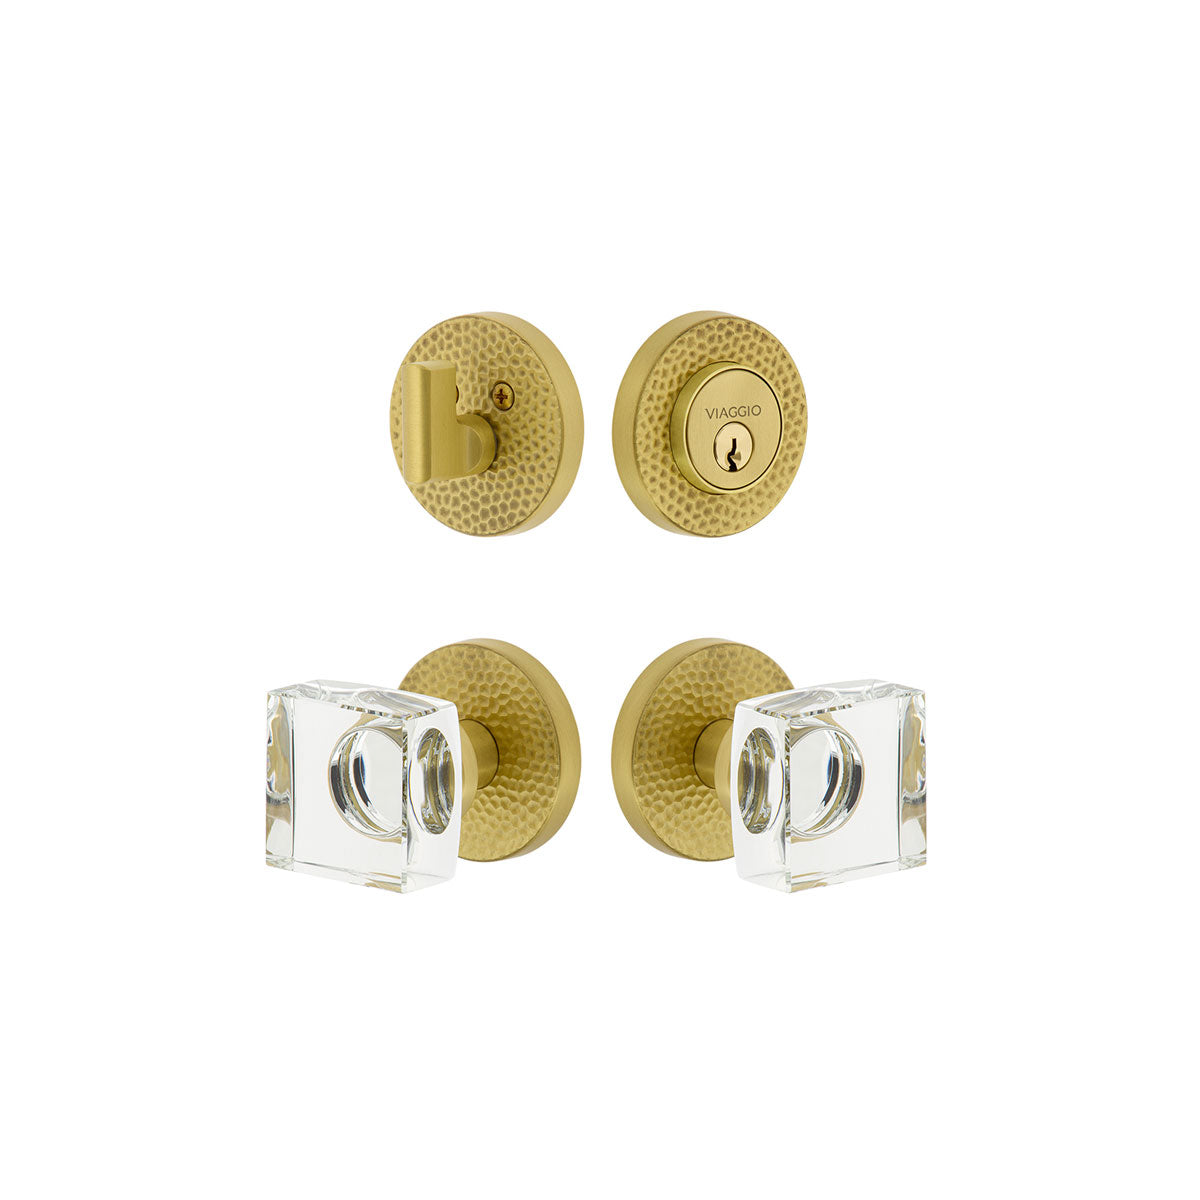 Circolo Hammered Rosette Entry Set with Quadrato Crystal Knob in Satin Brass